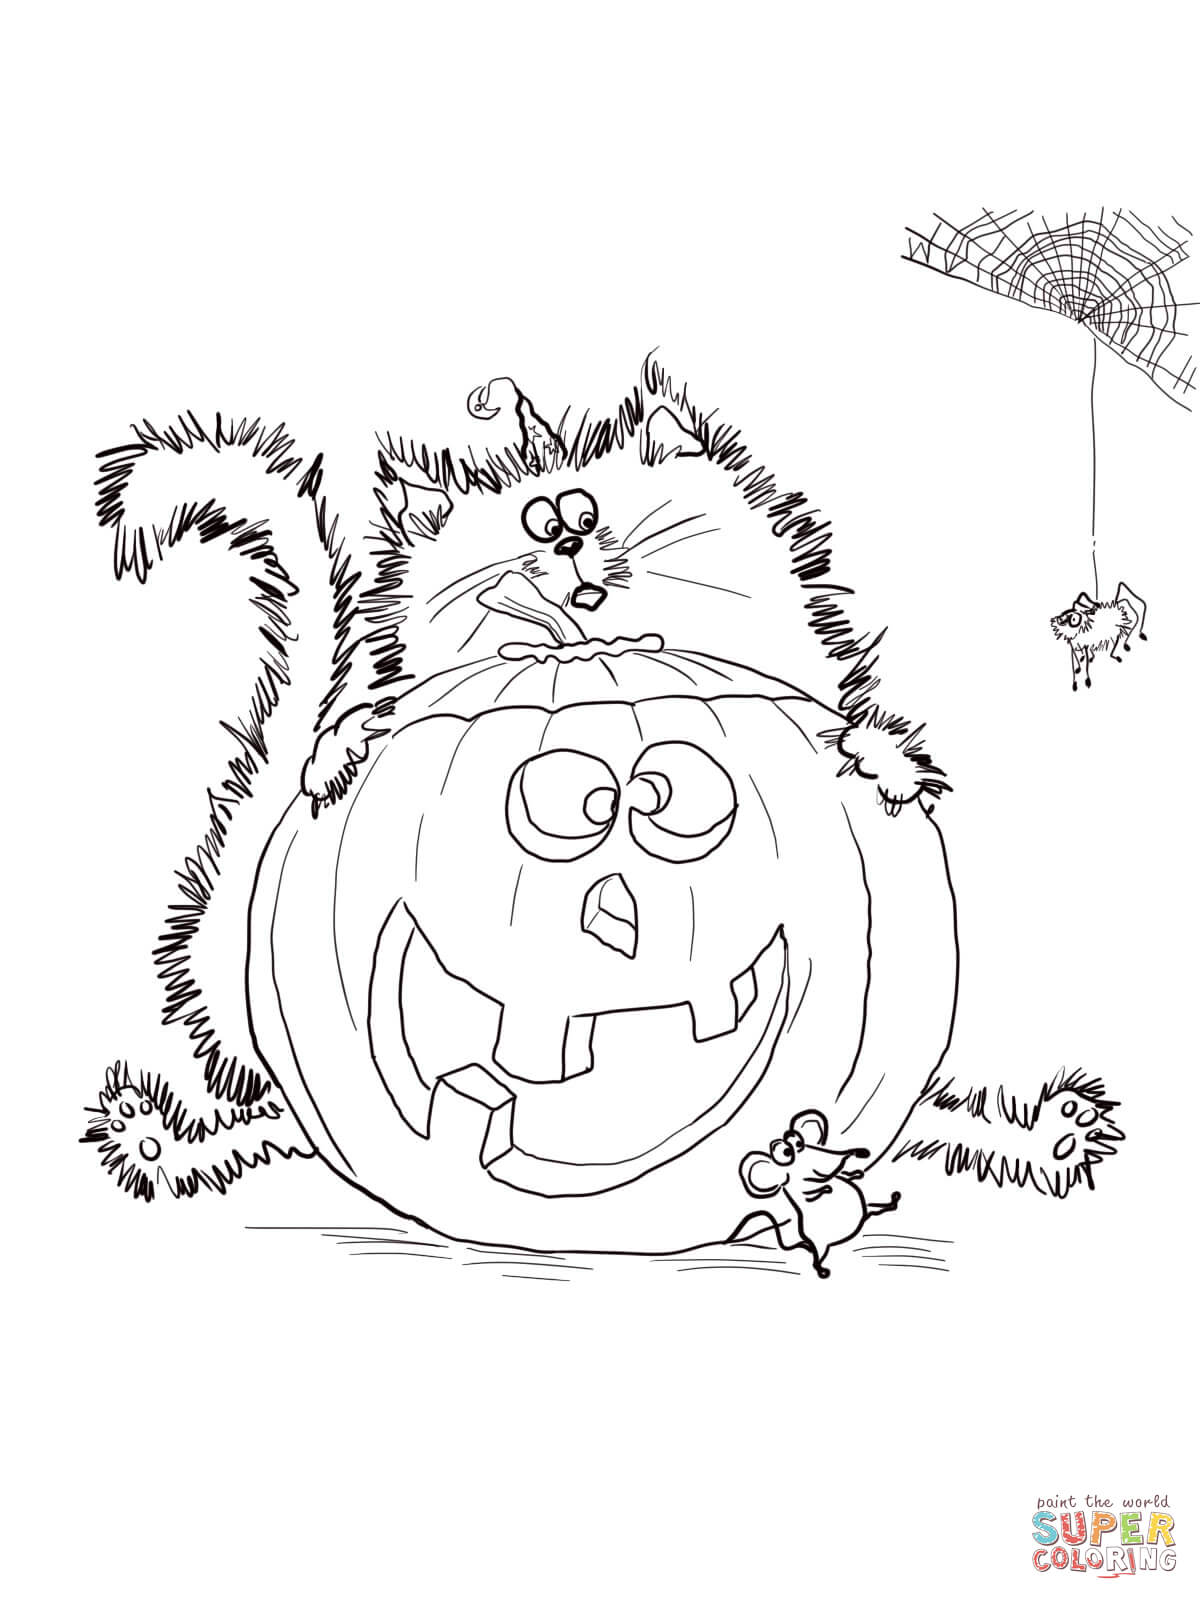 Featured image of post Pete The Cat Coloring Page Pete the cat inspire images by melonheadz illustrating and doodles